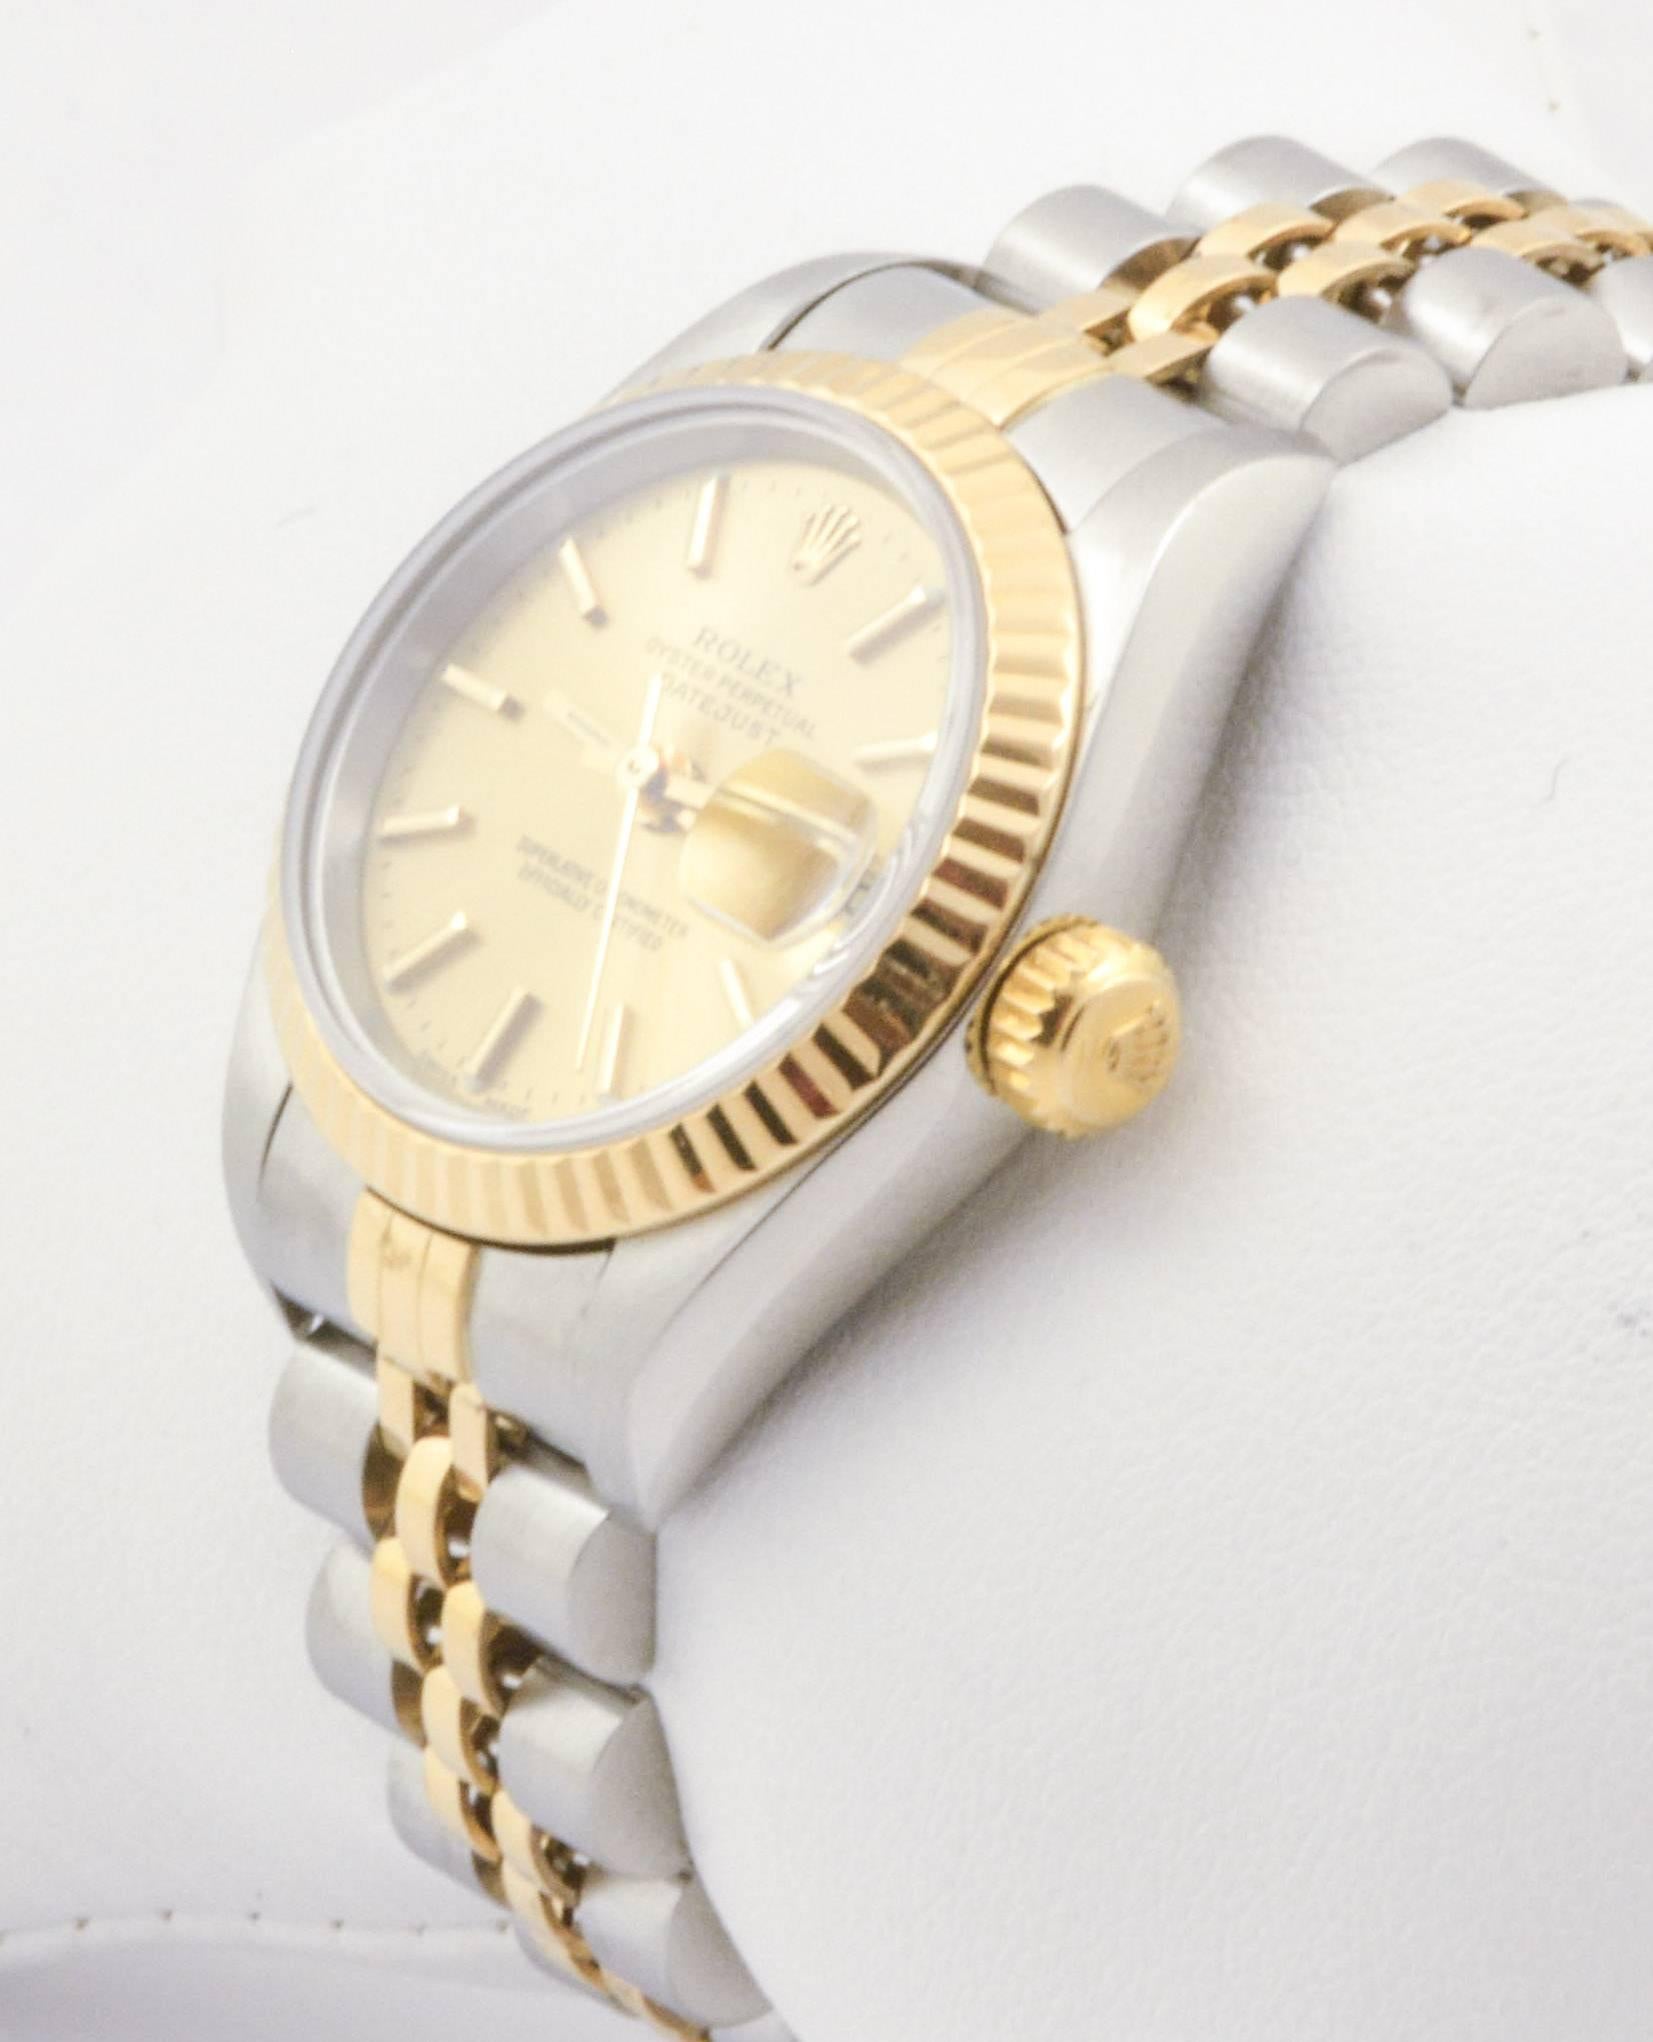 This striking certified pre-owned Rolex watch has a 26mm case with a fluted bezel and a classy champagne dial with dial markers. Fitted with a sapphire crystal, this timepiece has a Jubilee bracelet and is made with 18kt yellow gold and stainless